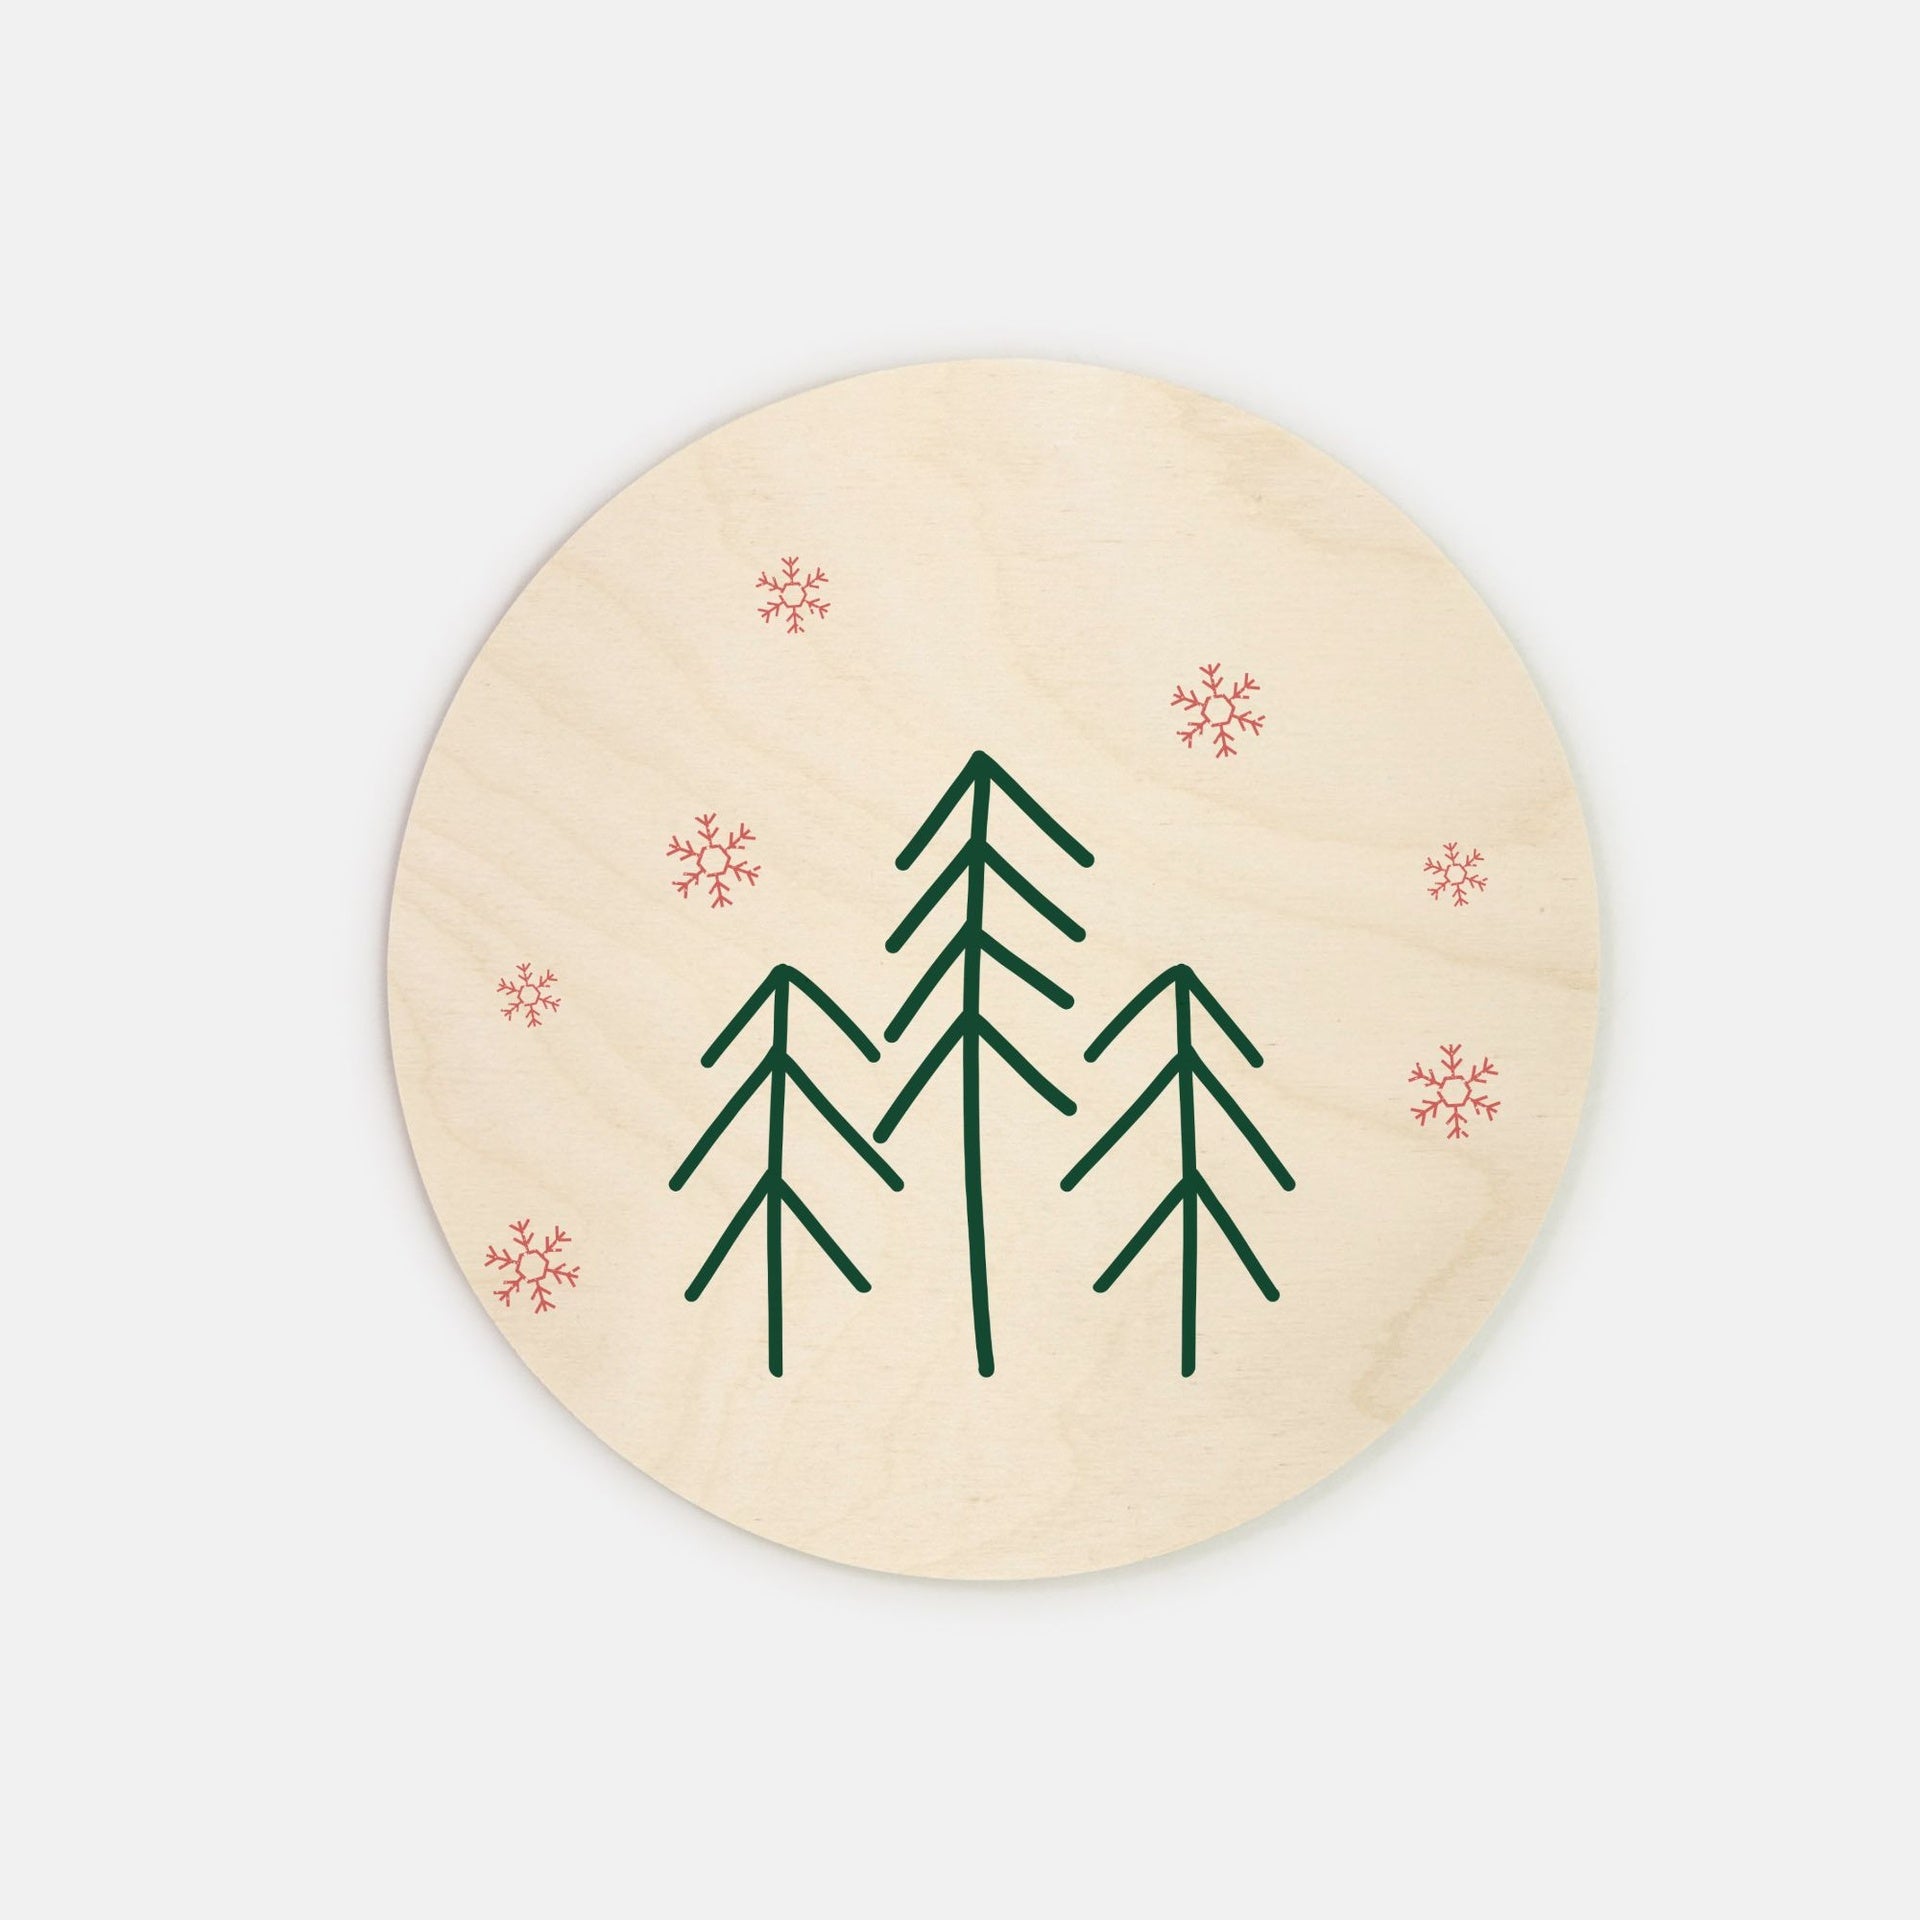 8" Round Wood Sign - Evergreen Trees & Red Snowflakes